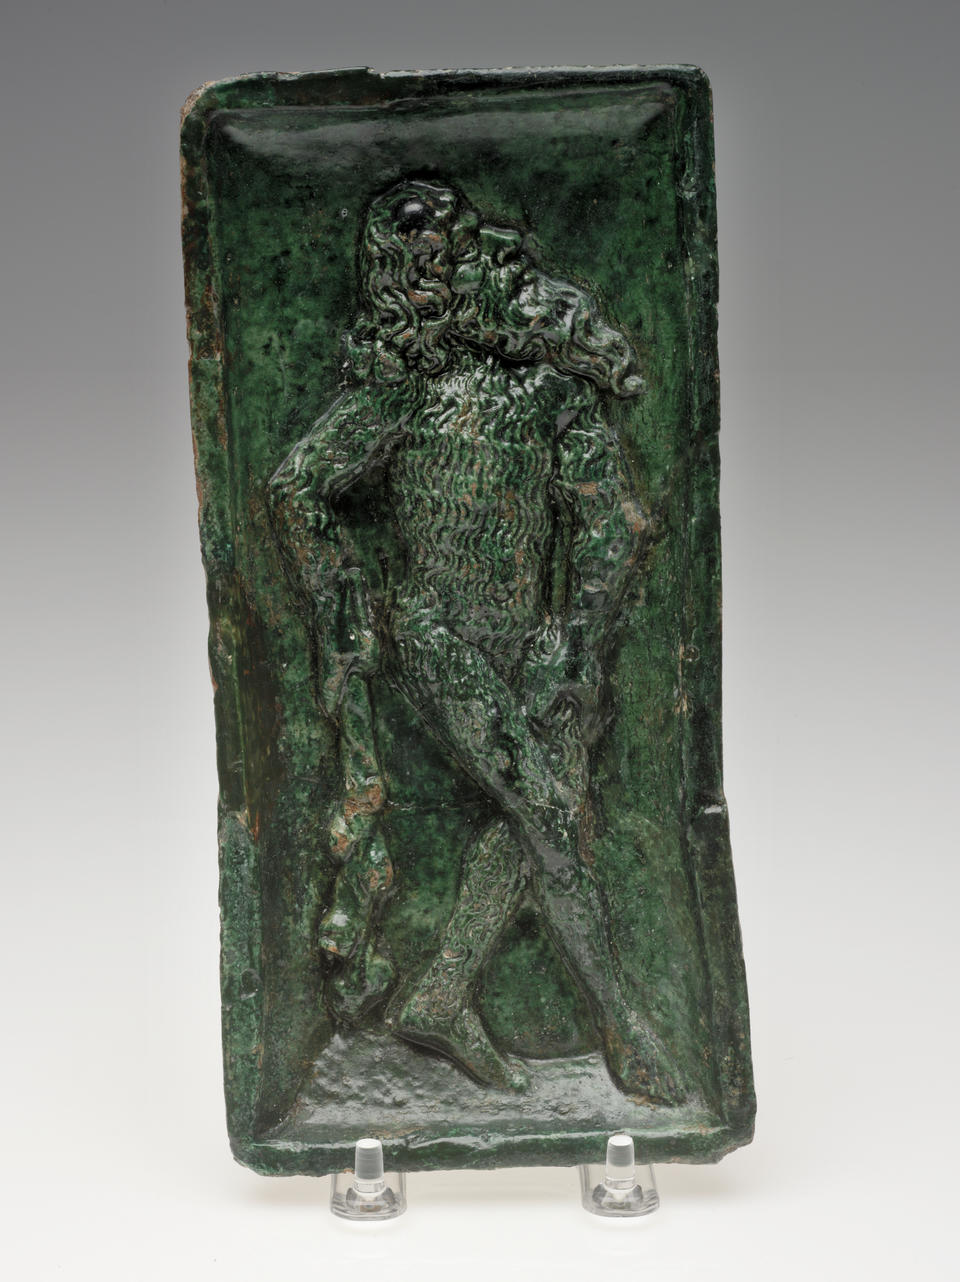 A green sculpted tile of a figure with long hair and beard, holding a stick-like object.